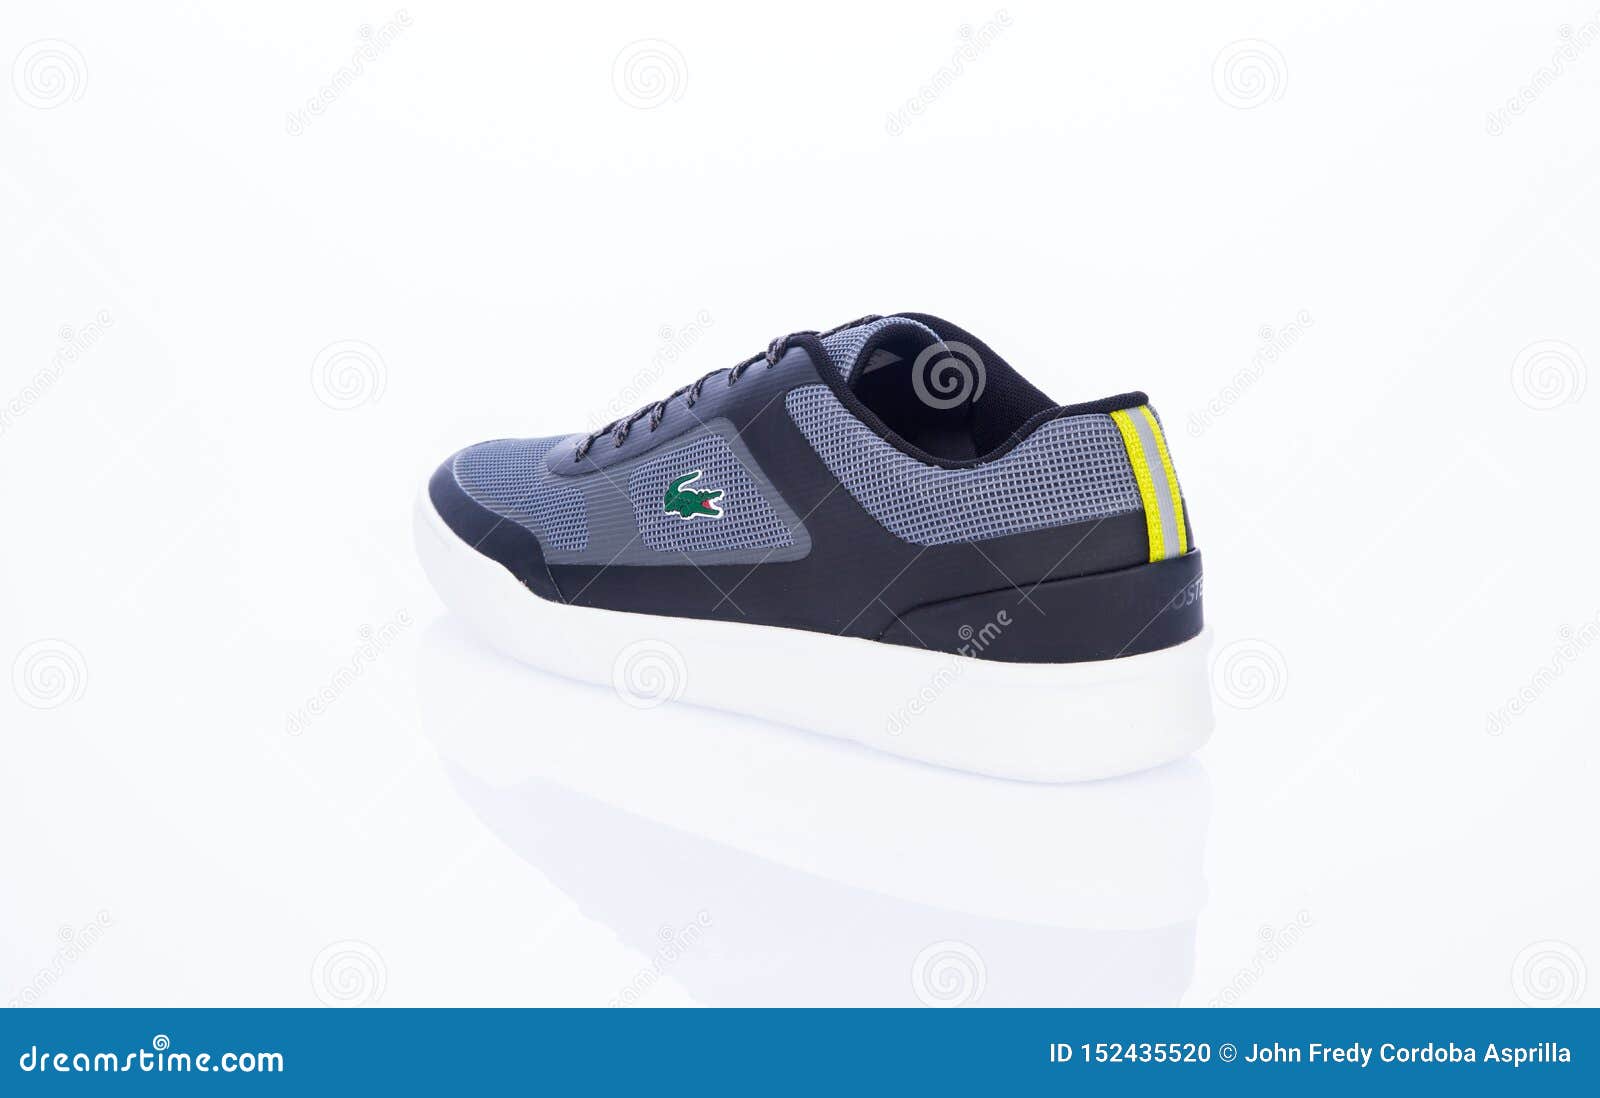 new lacoste sneakers 2019